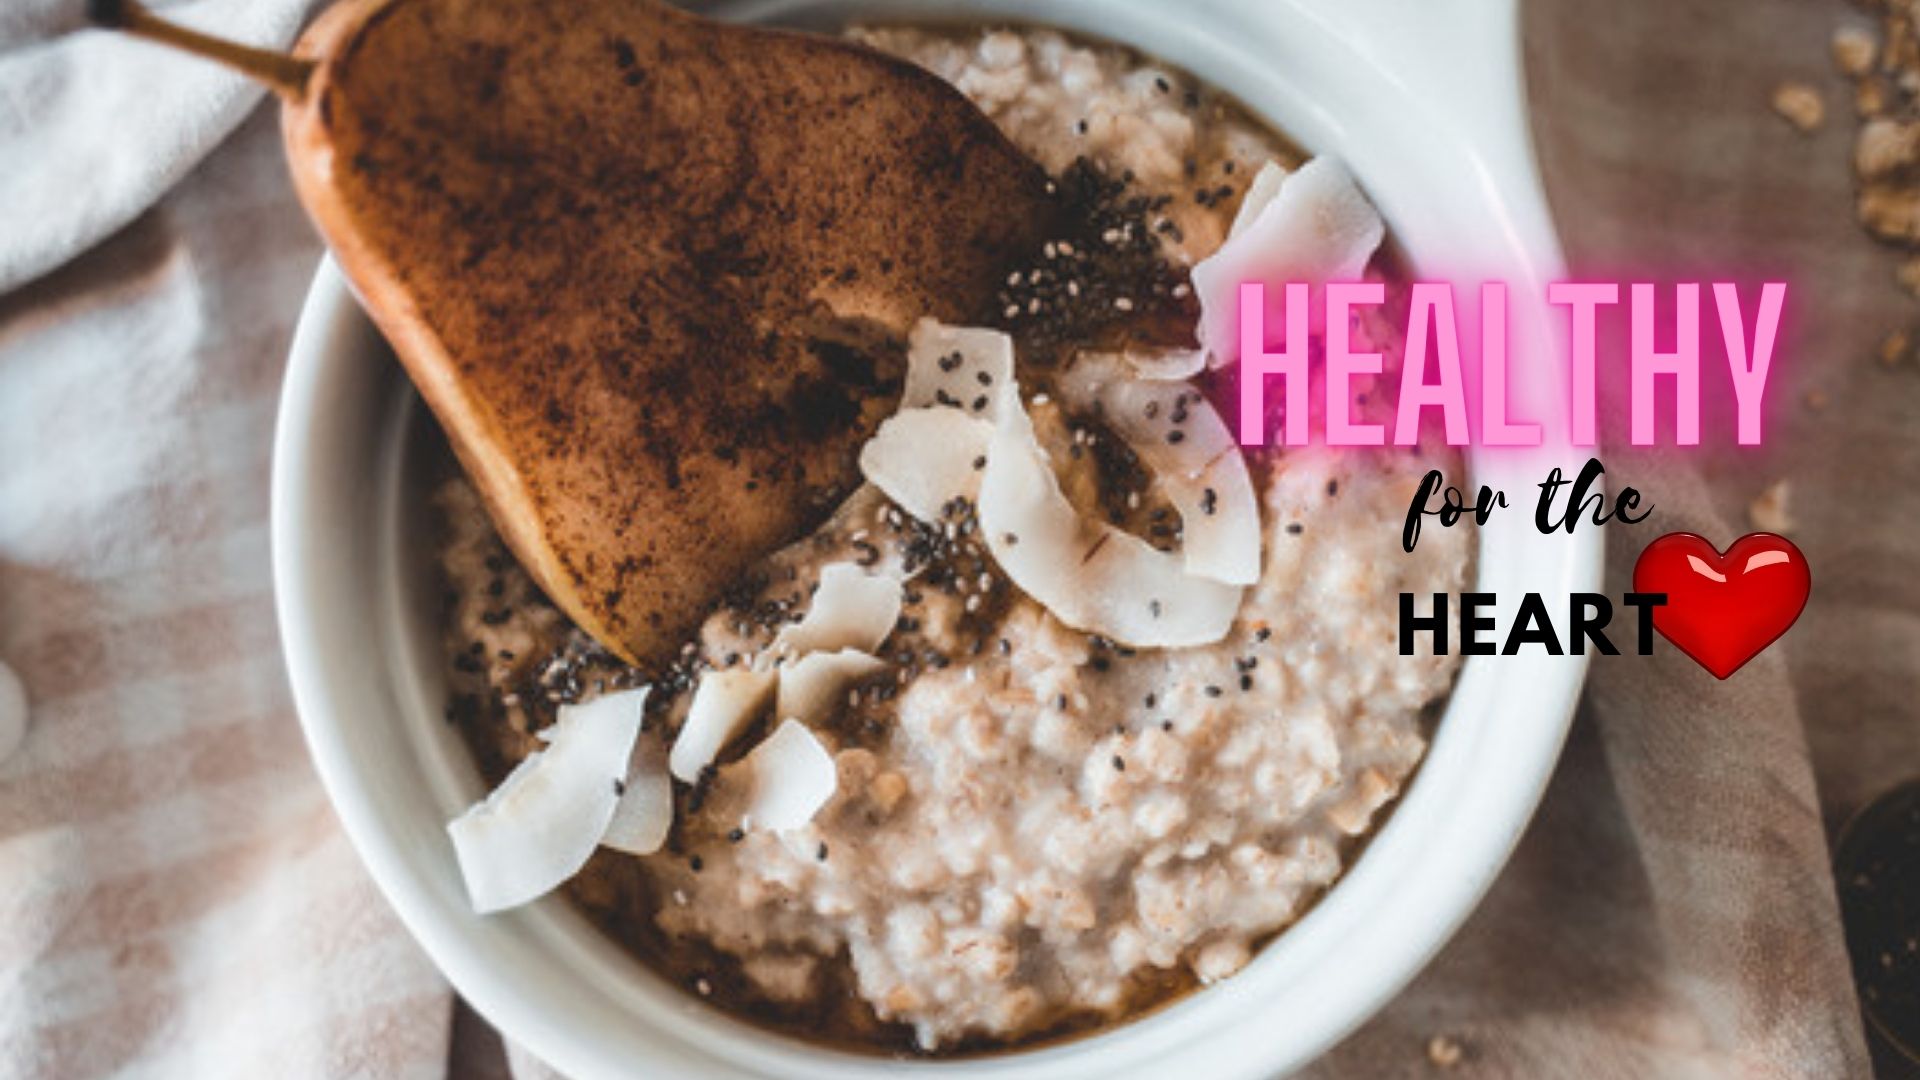 Oatmeal is healthy for the heart.